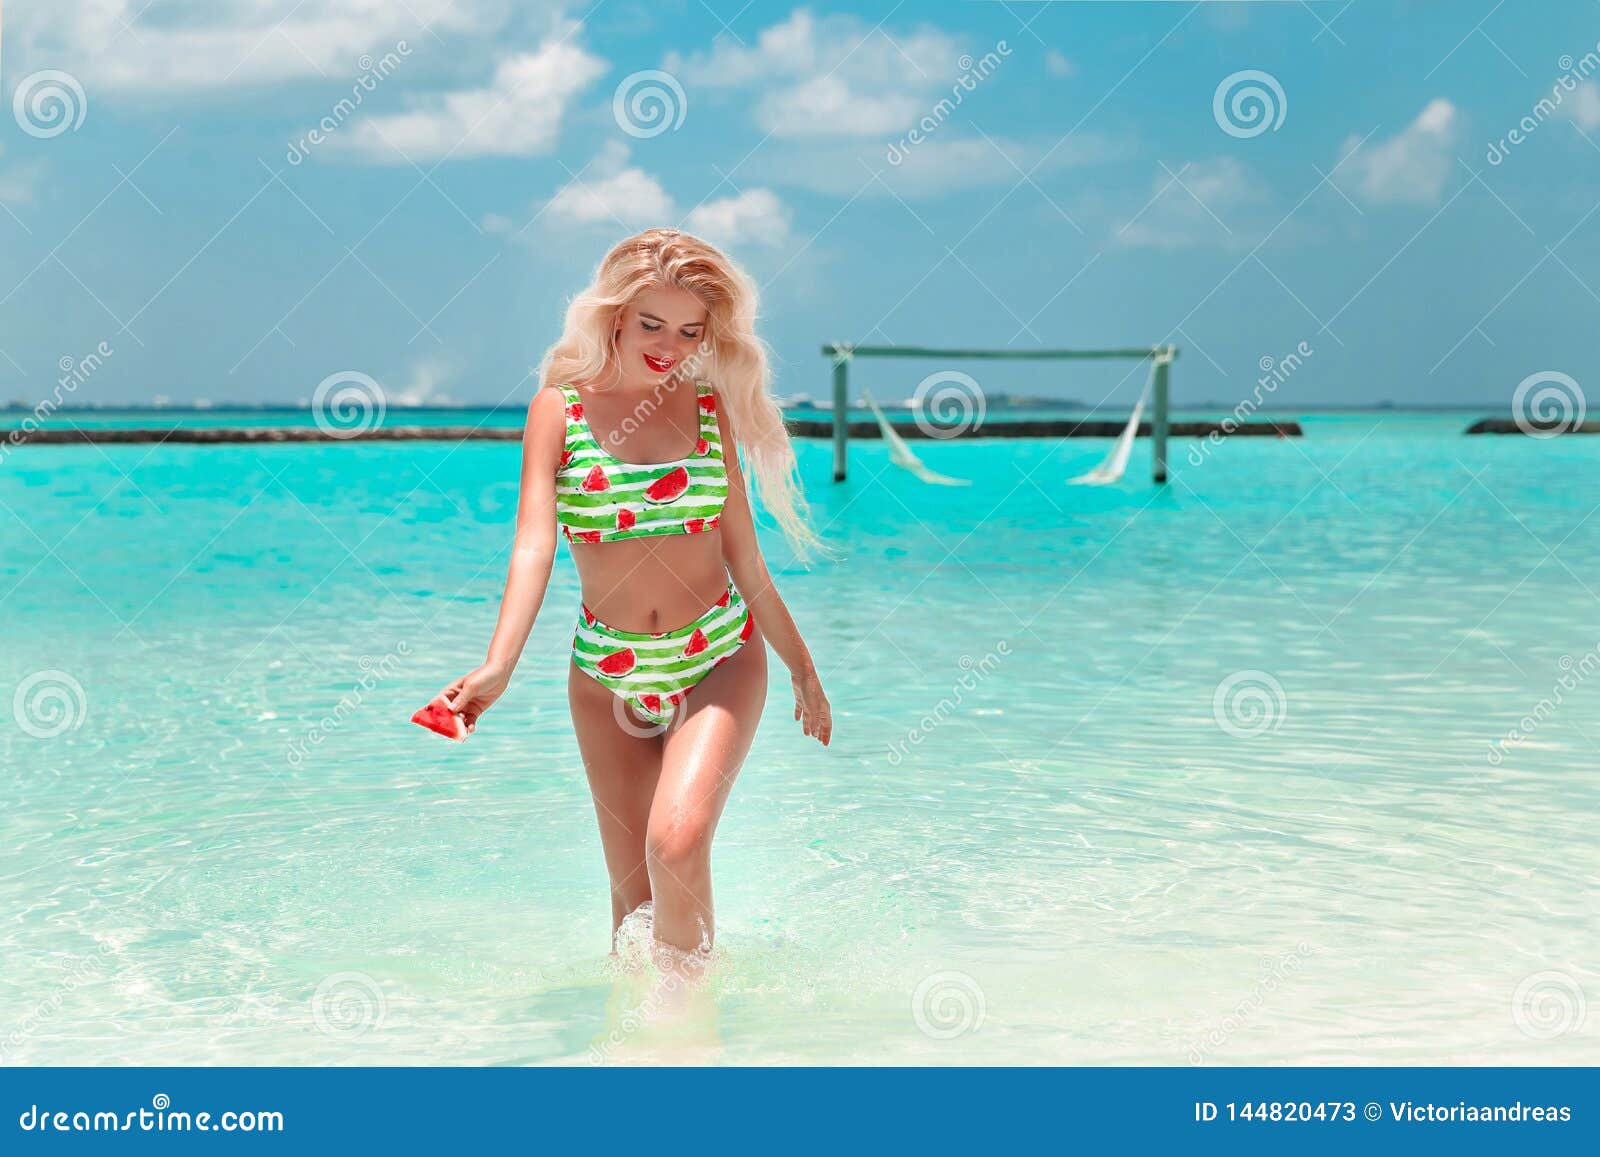 Teen Blond Girl In A Bikini Stock Photo, Picture and Royalty Free Image.  Image 21572799.